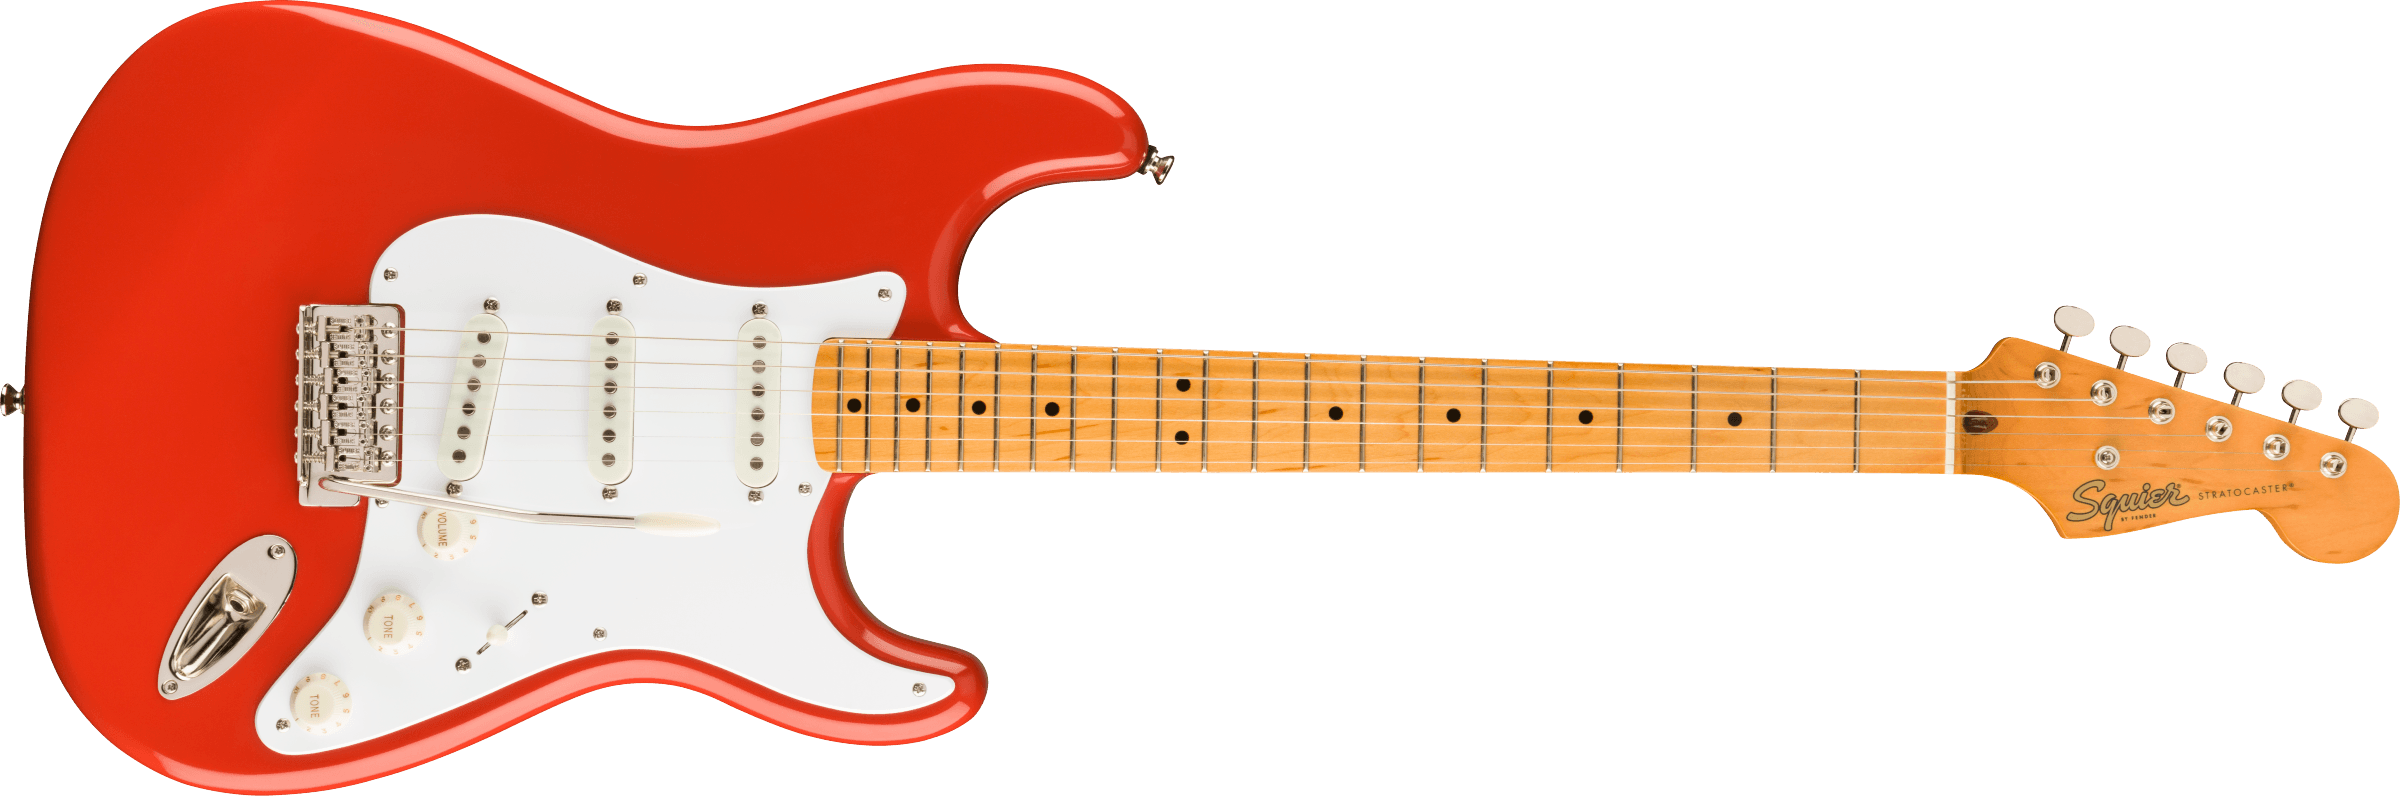 Squier® Classic Vibe '50s Stratocaster®, Maple Fingerboard, Fiesta Red